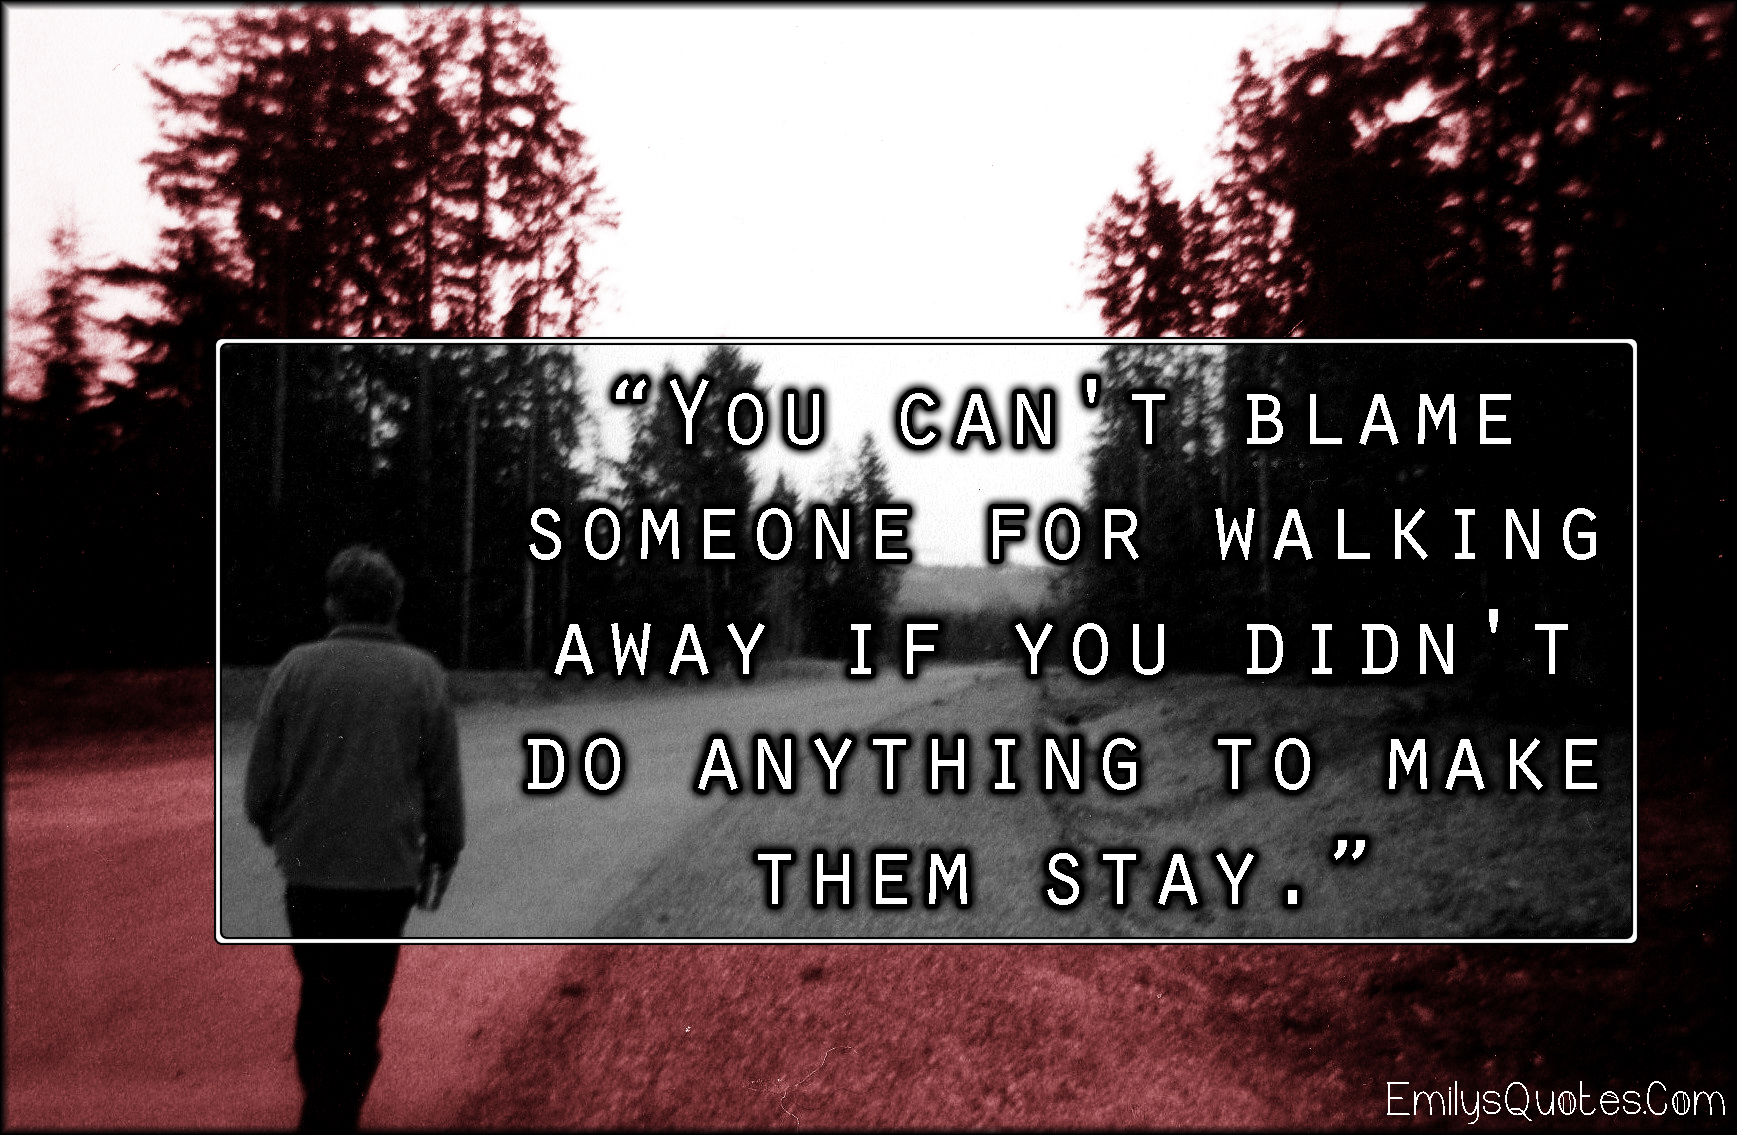 You can’t blame someone for walking away if you didn’t do anything to make them stay